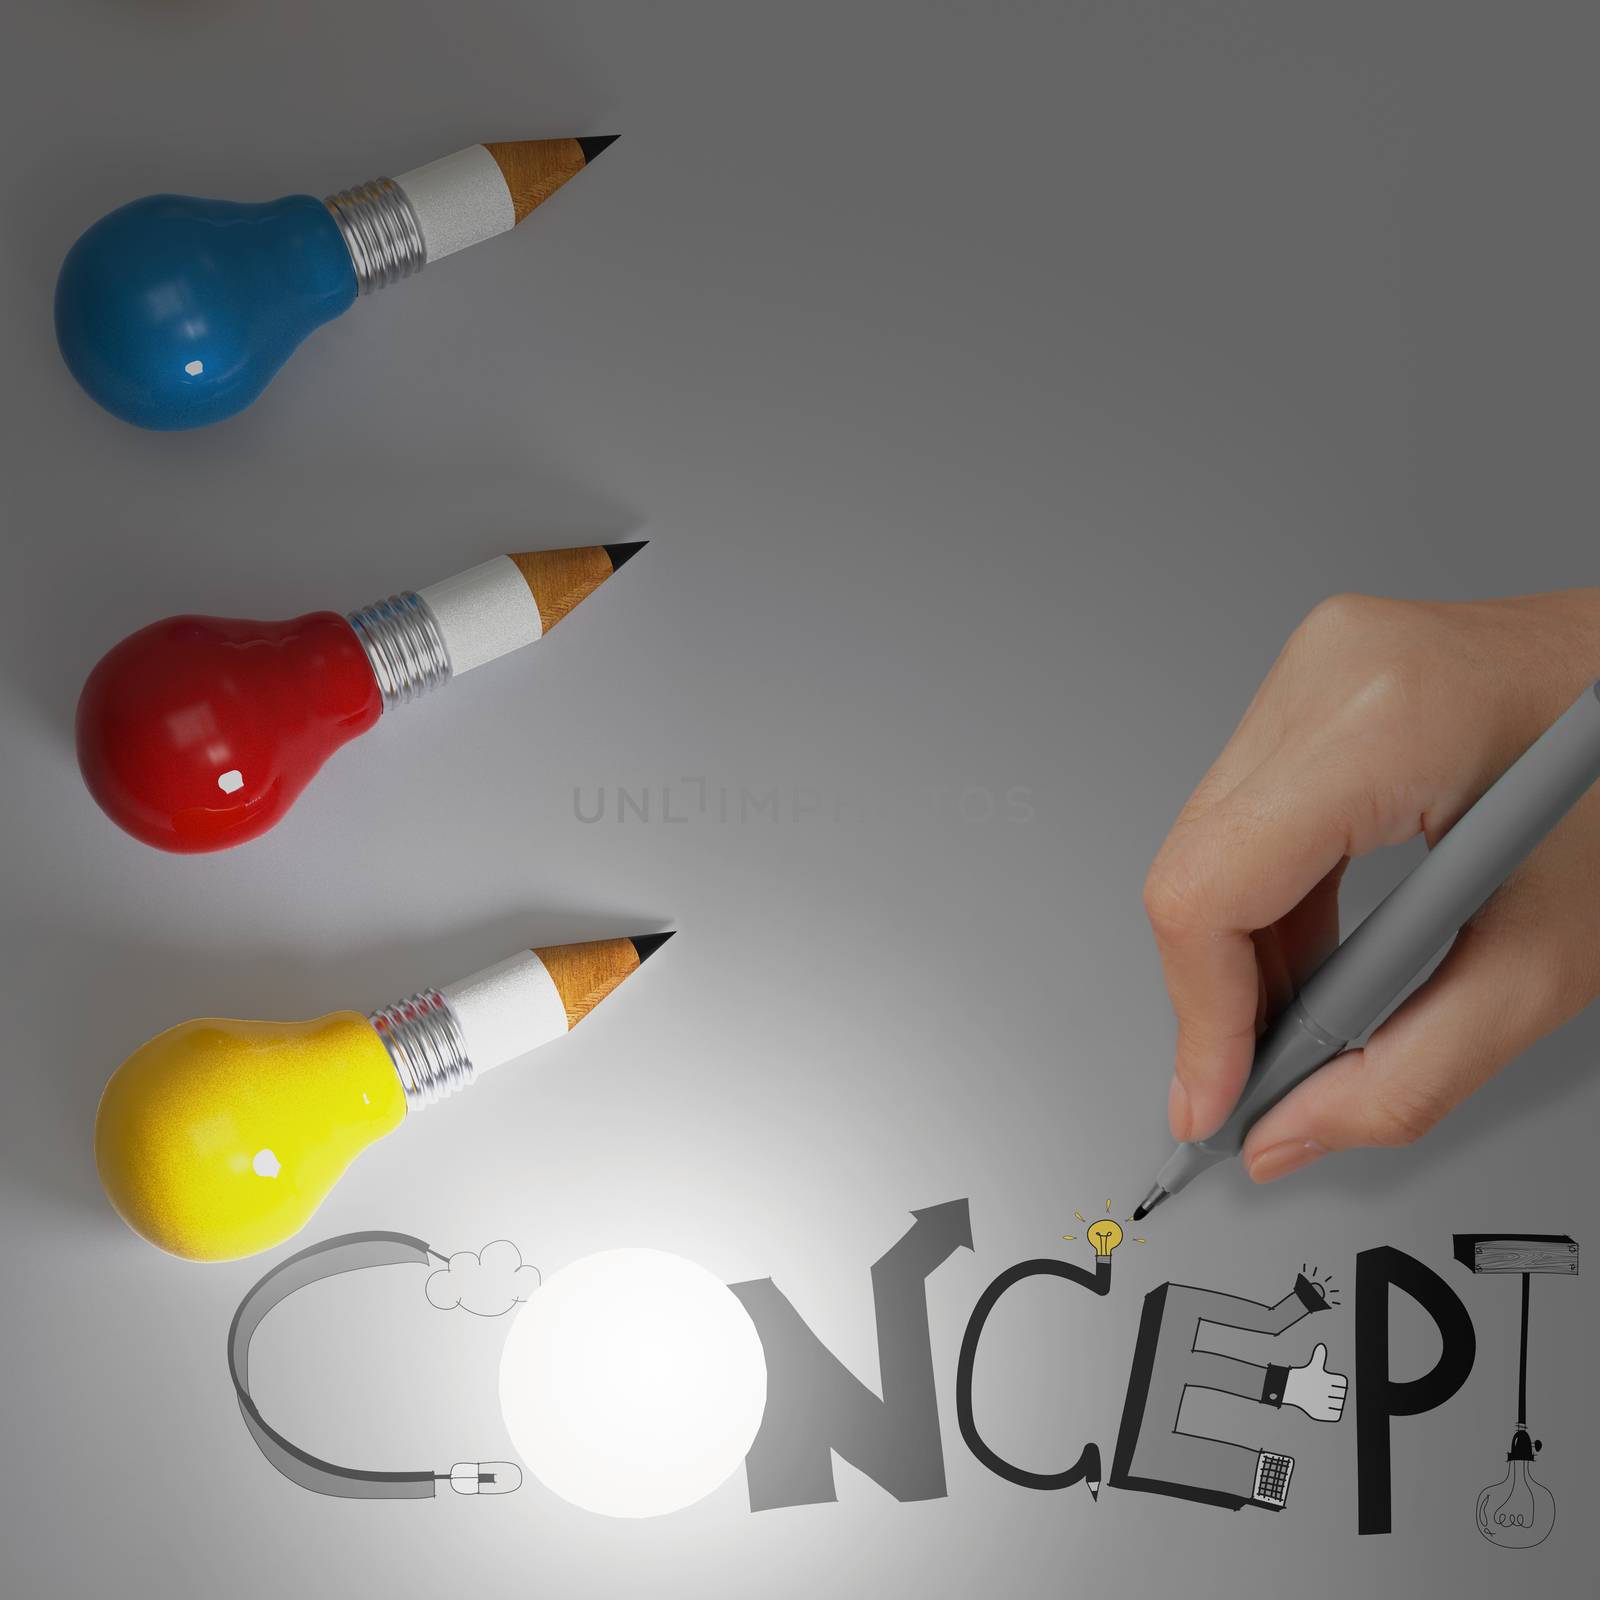 pencil lightbulb 3d and design word CONCEPT as concept by everythingpossible